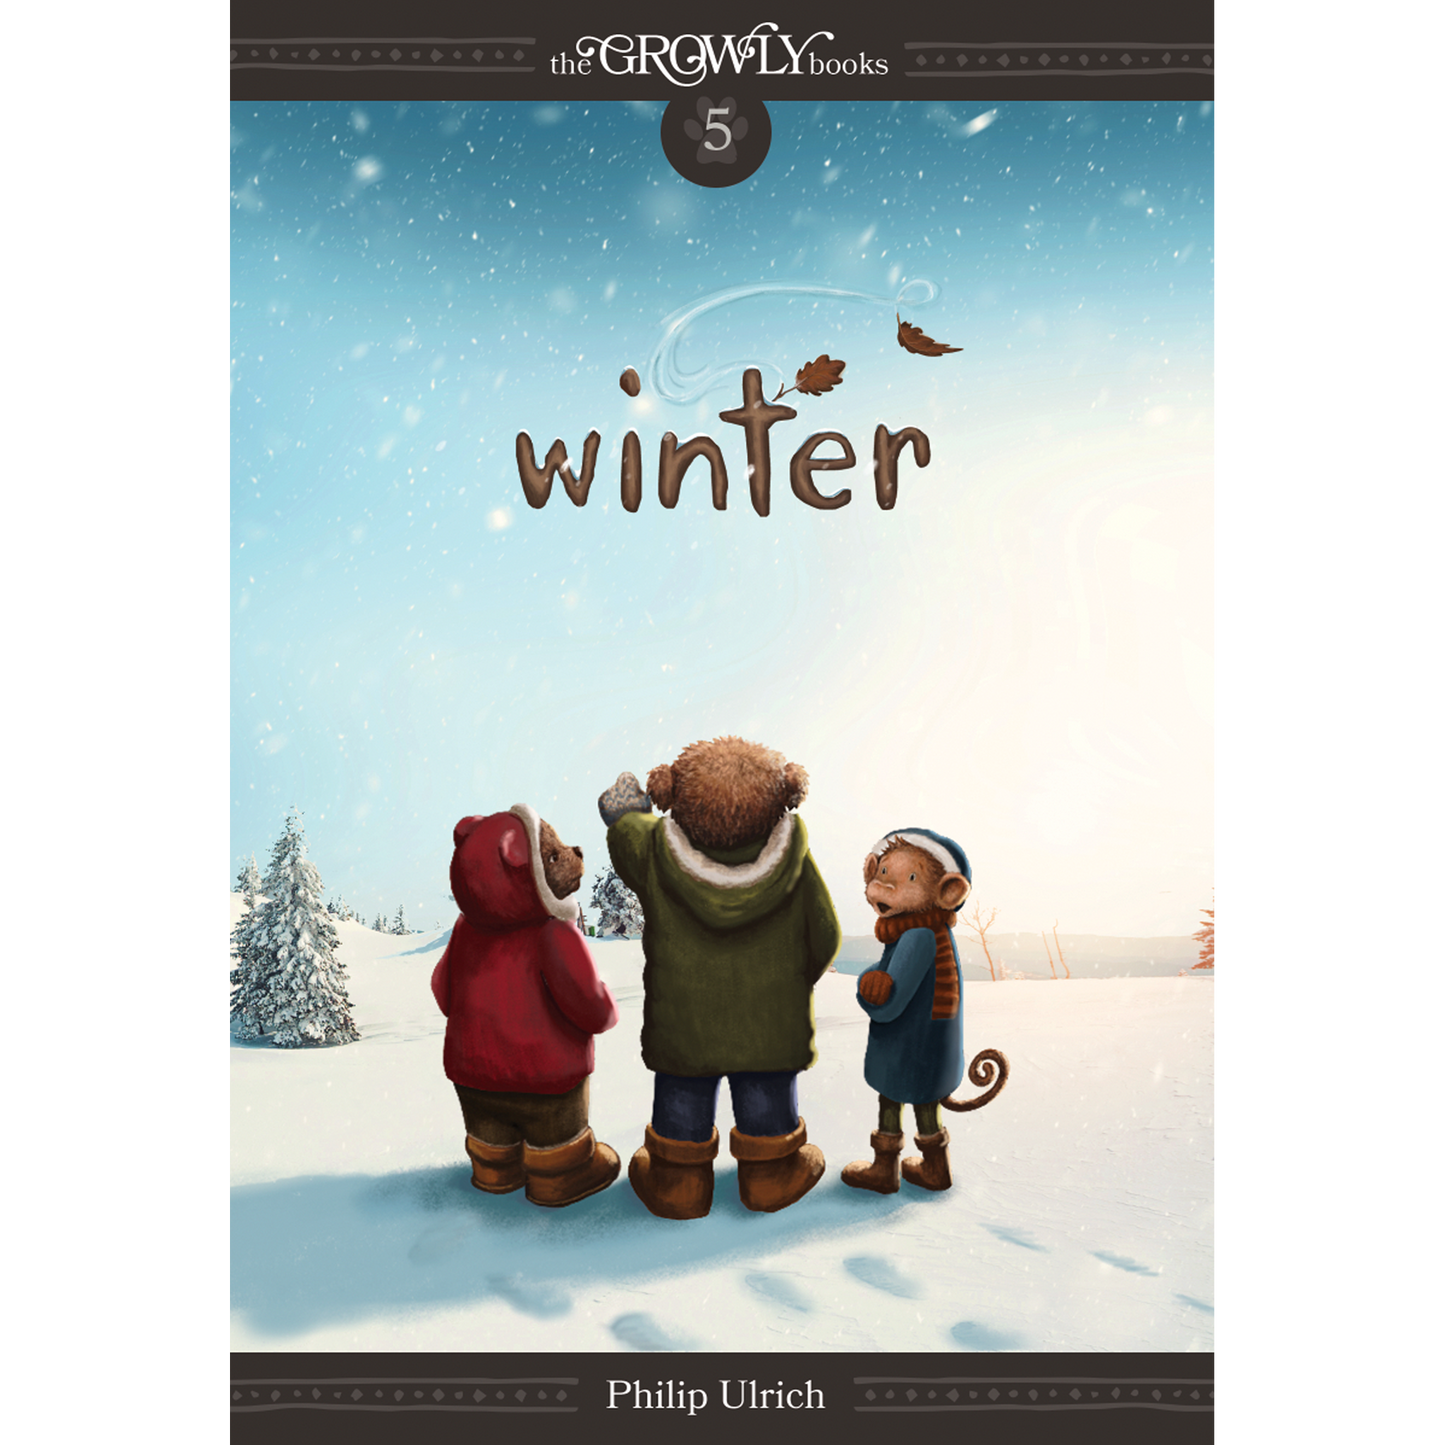 Winter (The Growly Books #5)